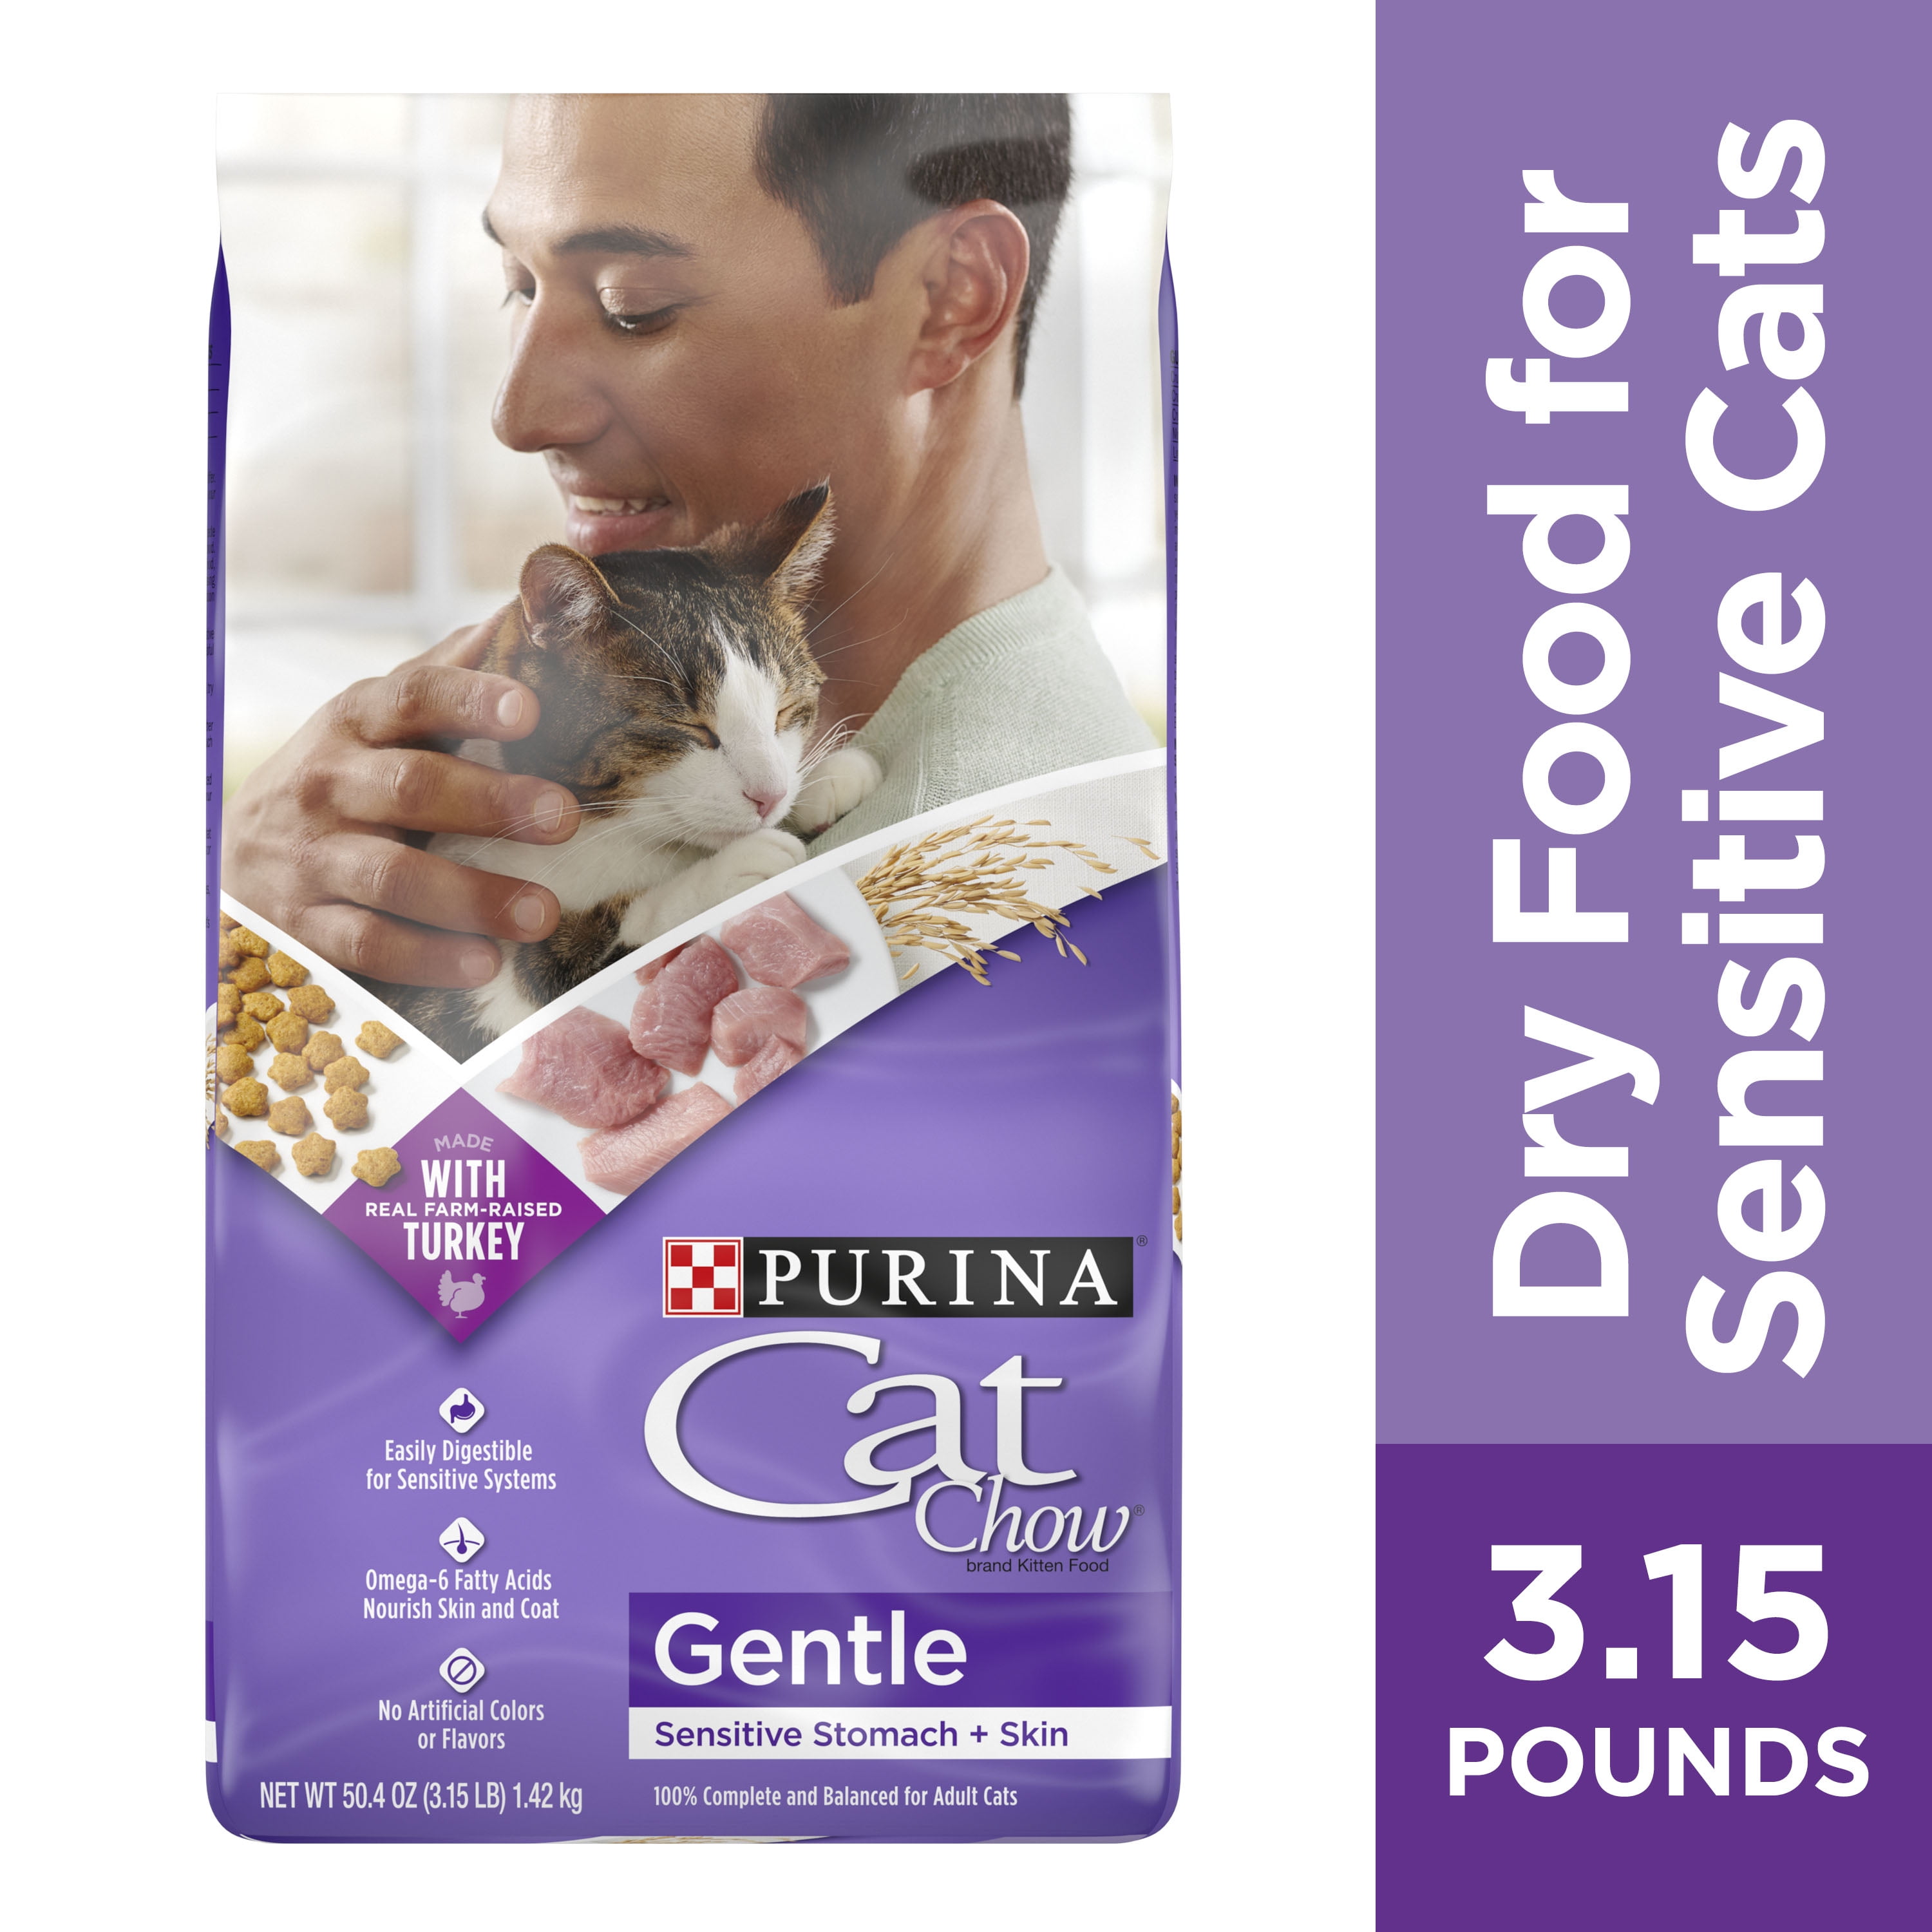 Purina Cat Chow Gentle Dry Cat Food, Sensitive Stomach + Skin, 3.15 lb